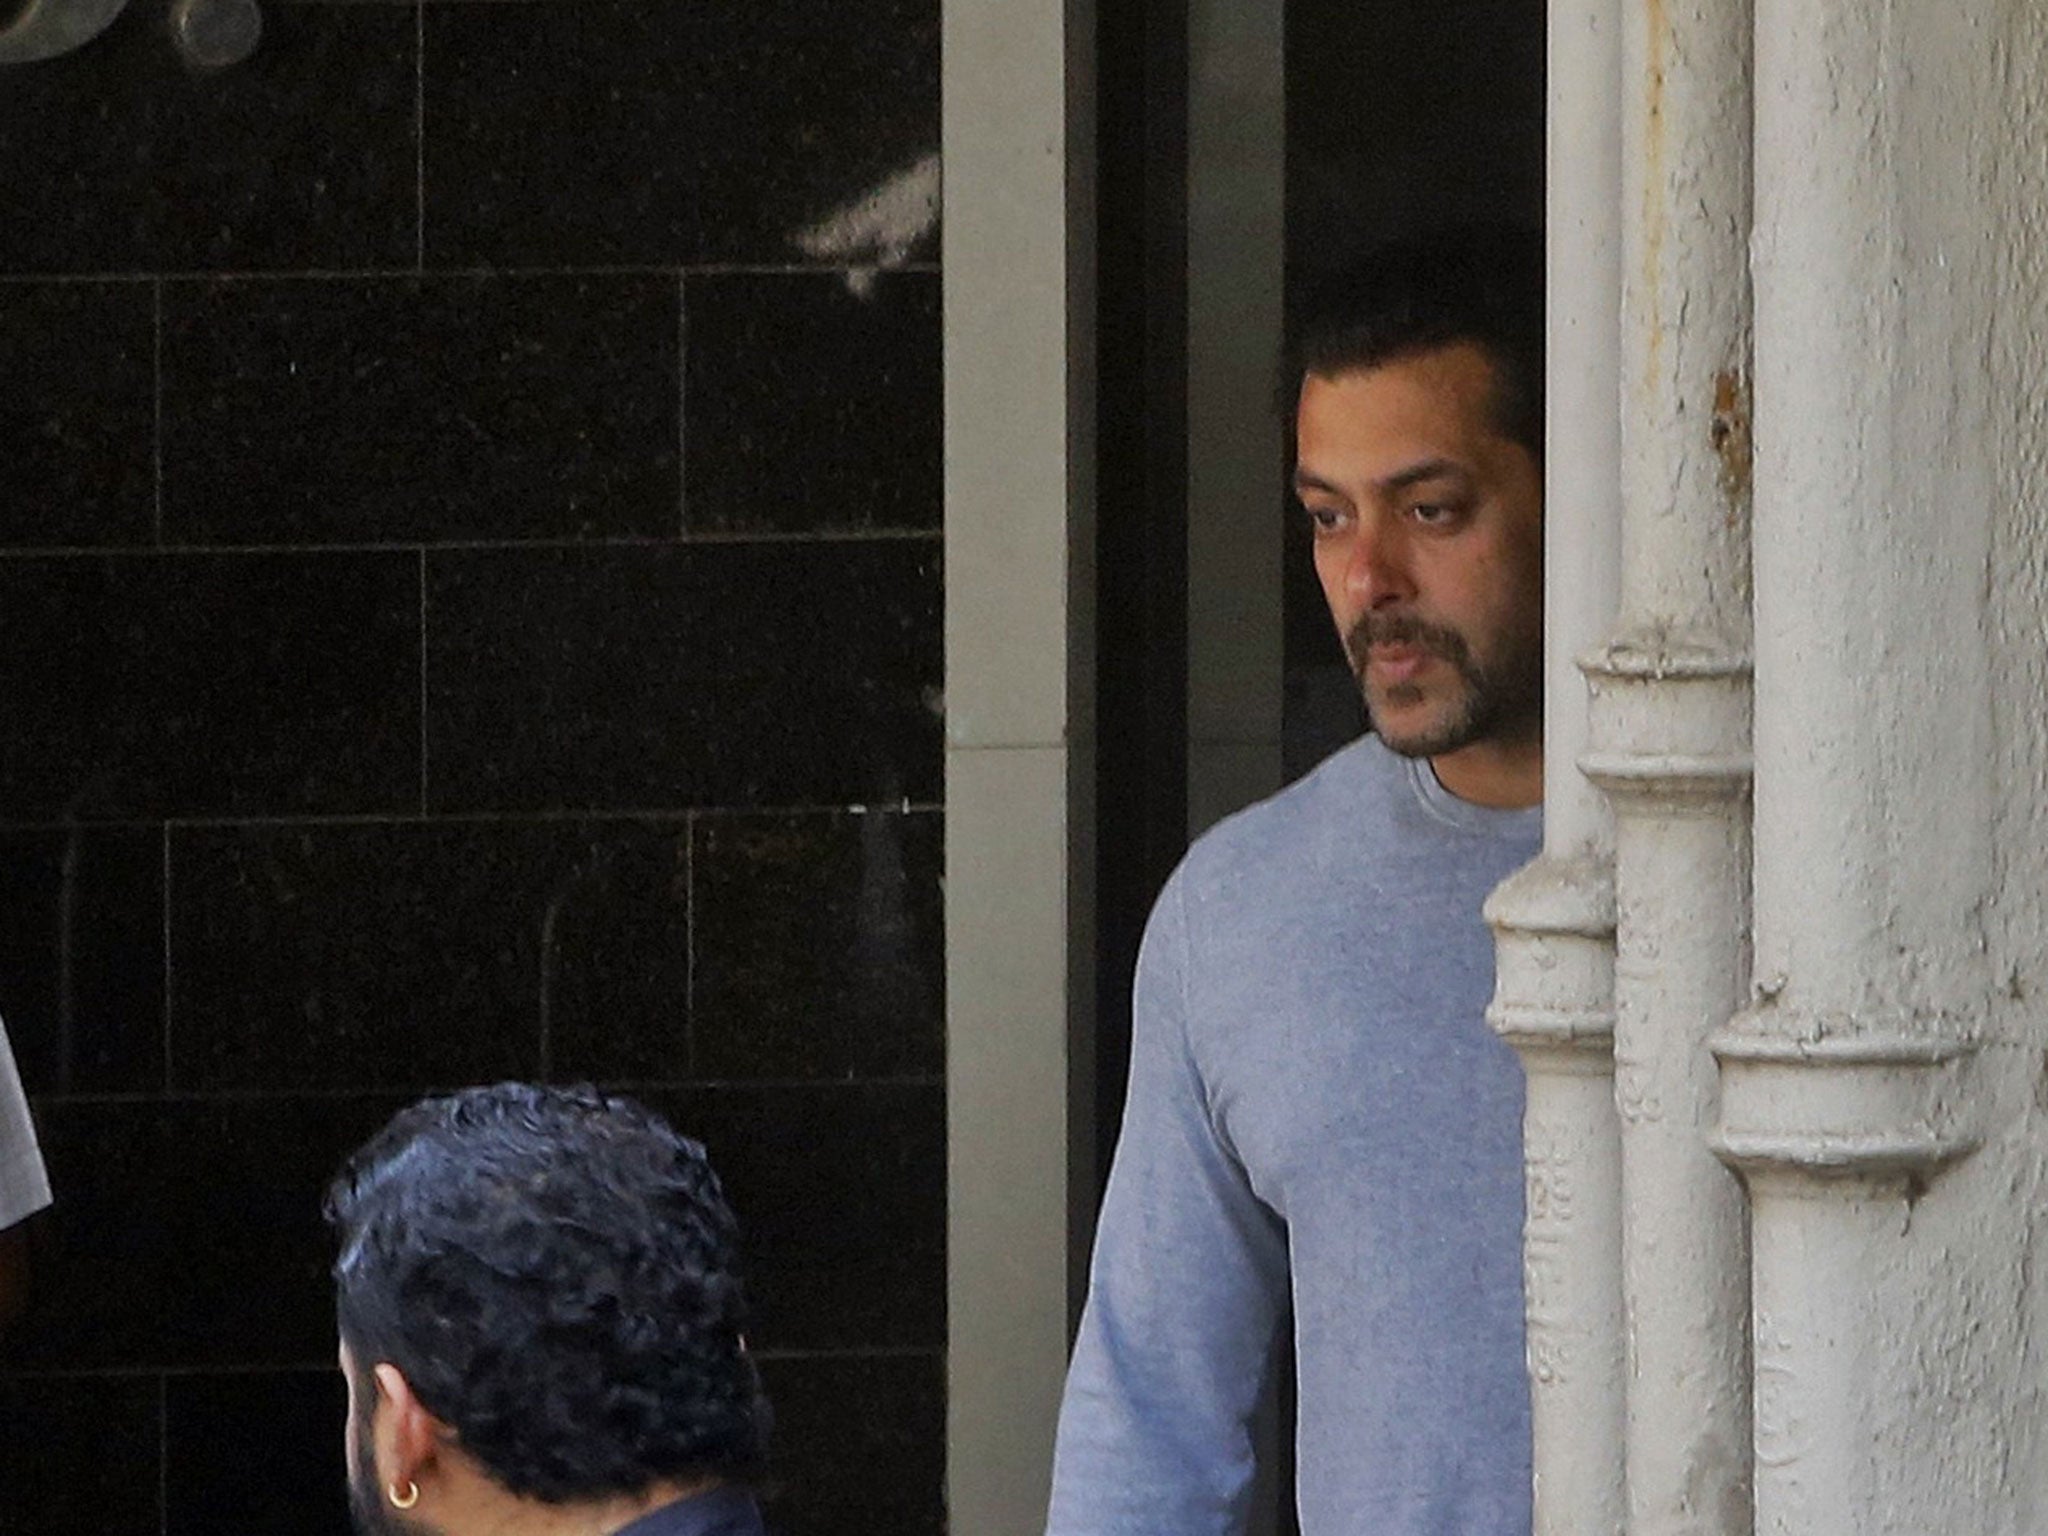 Salman Khan has been granted bail until his appeal in July